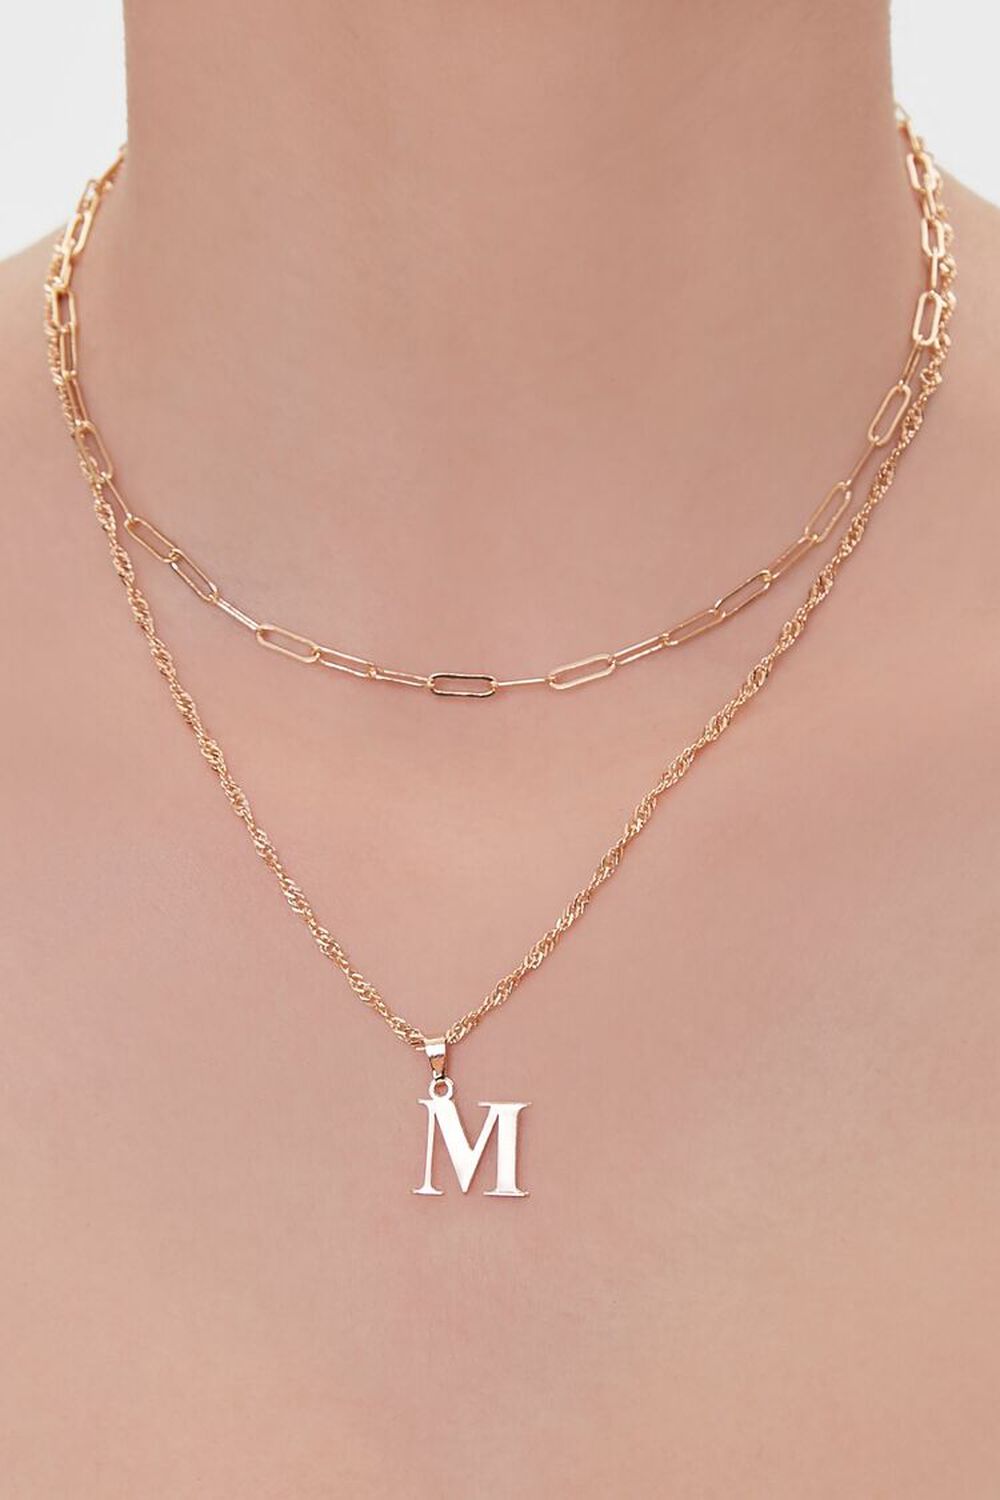 GOLD/M Letter Pendant Layered Necklace, image 1